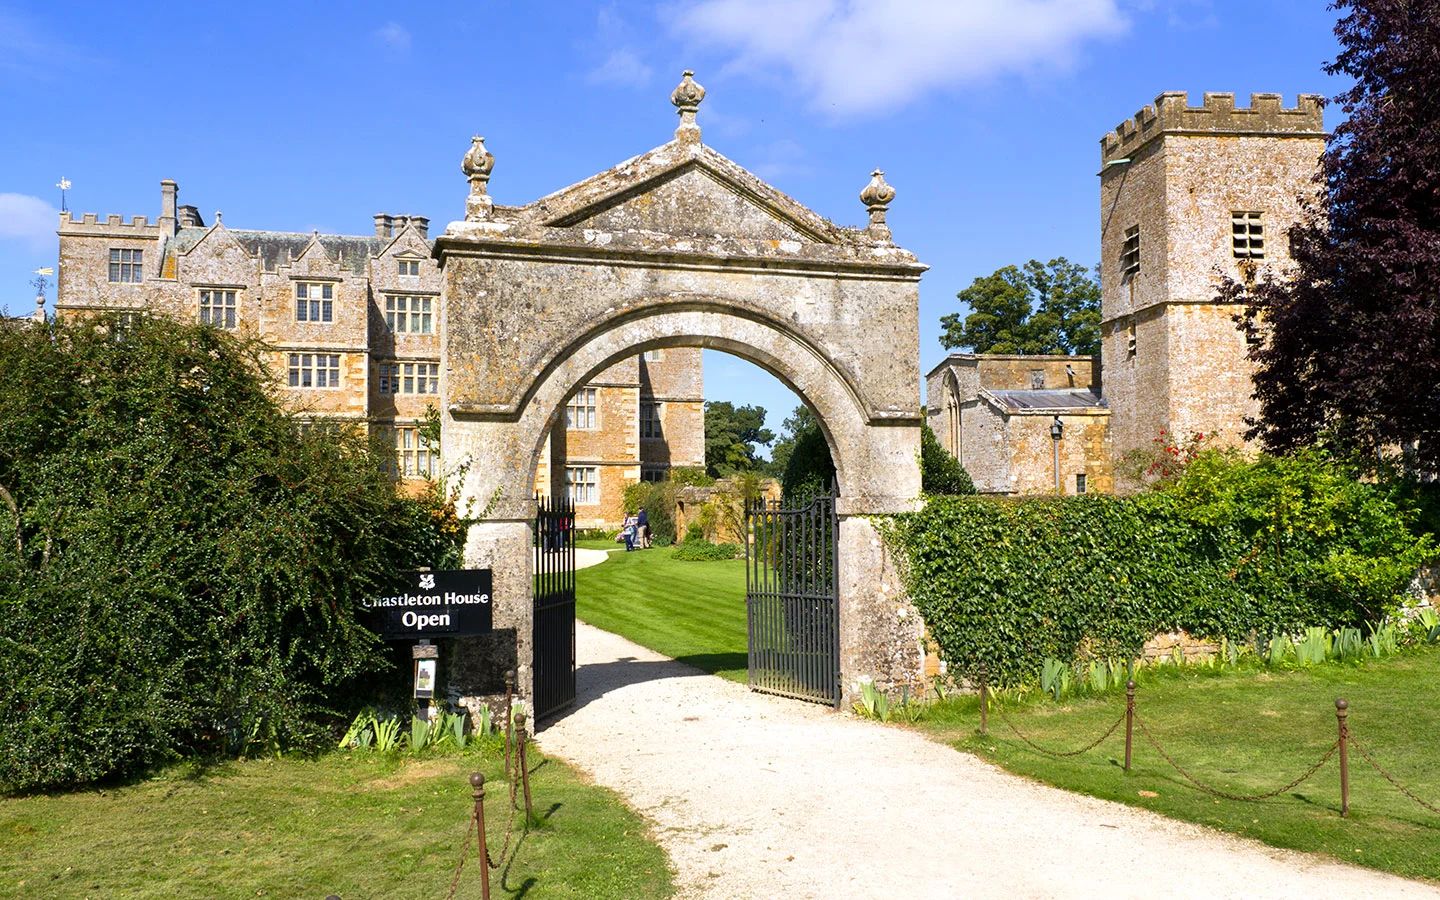 The entrance to Chastleton House 